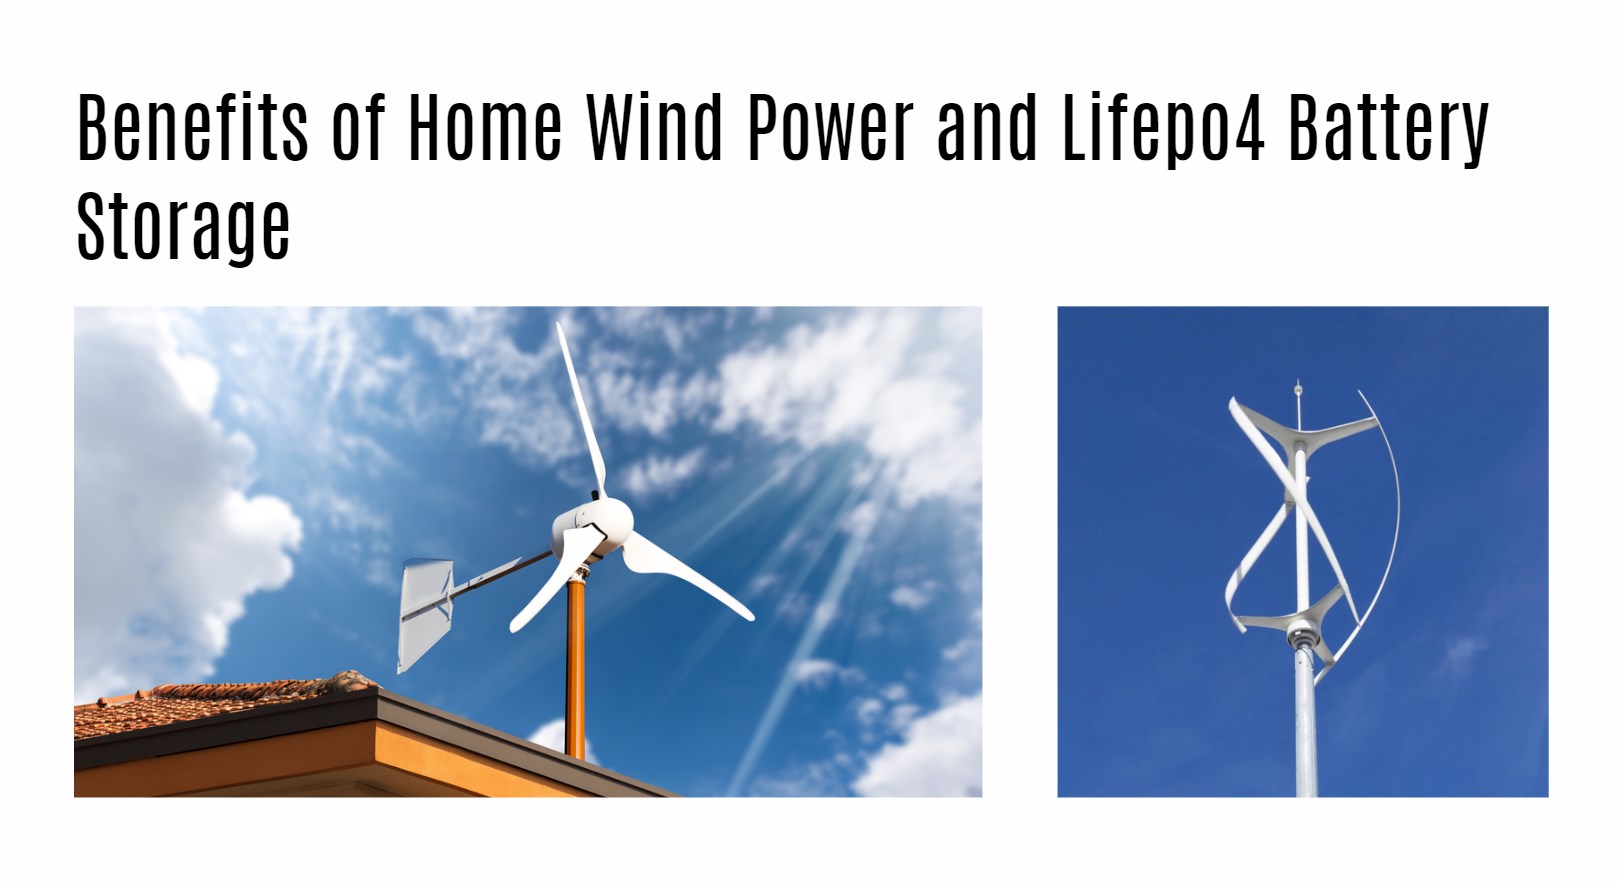 Benefits of Home Wind Power and Lifepo4 Battery Storage